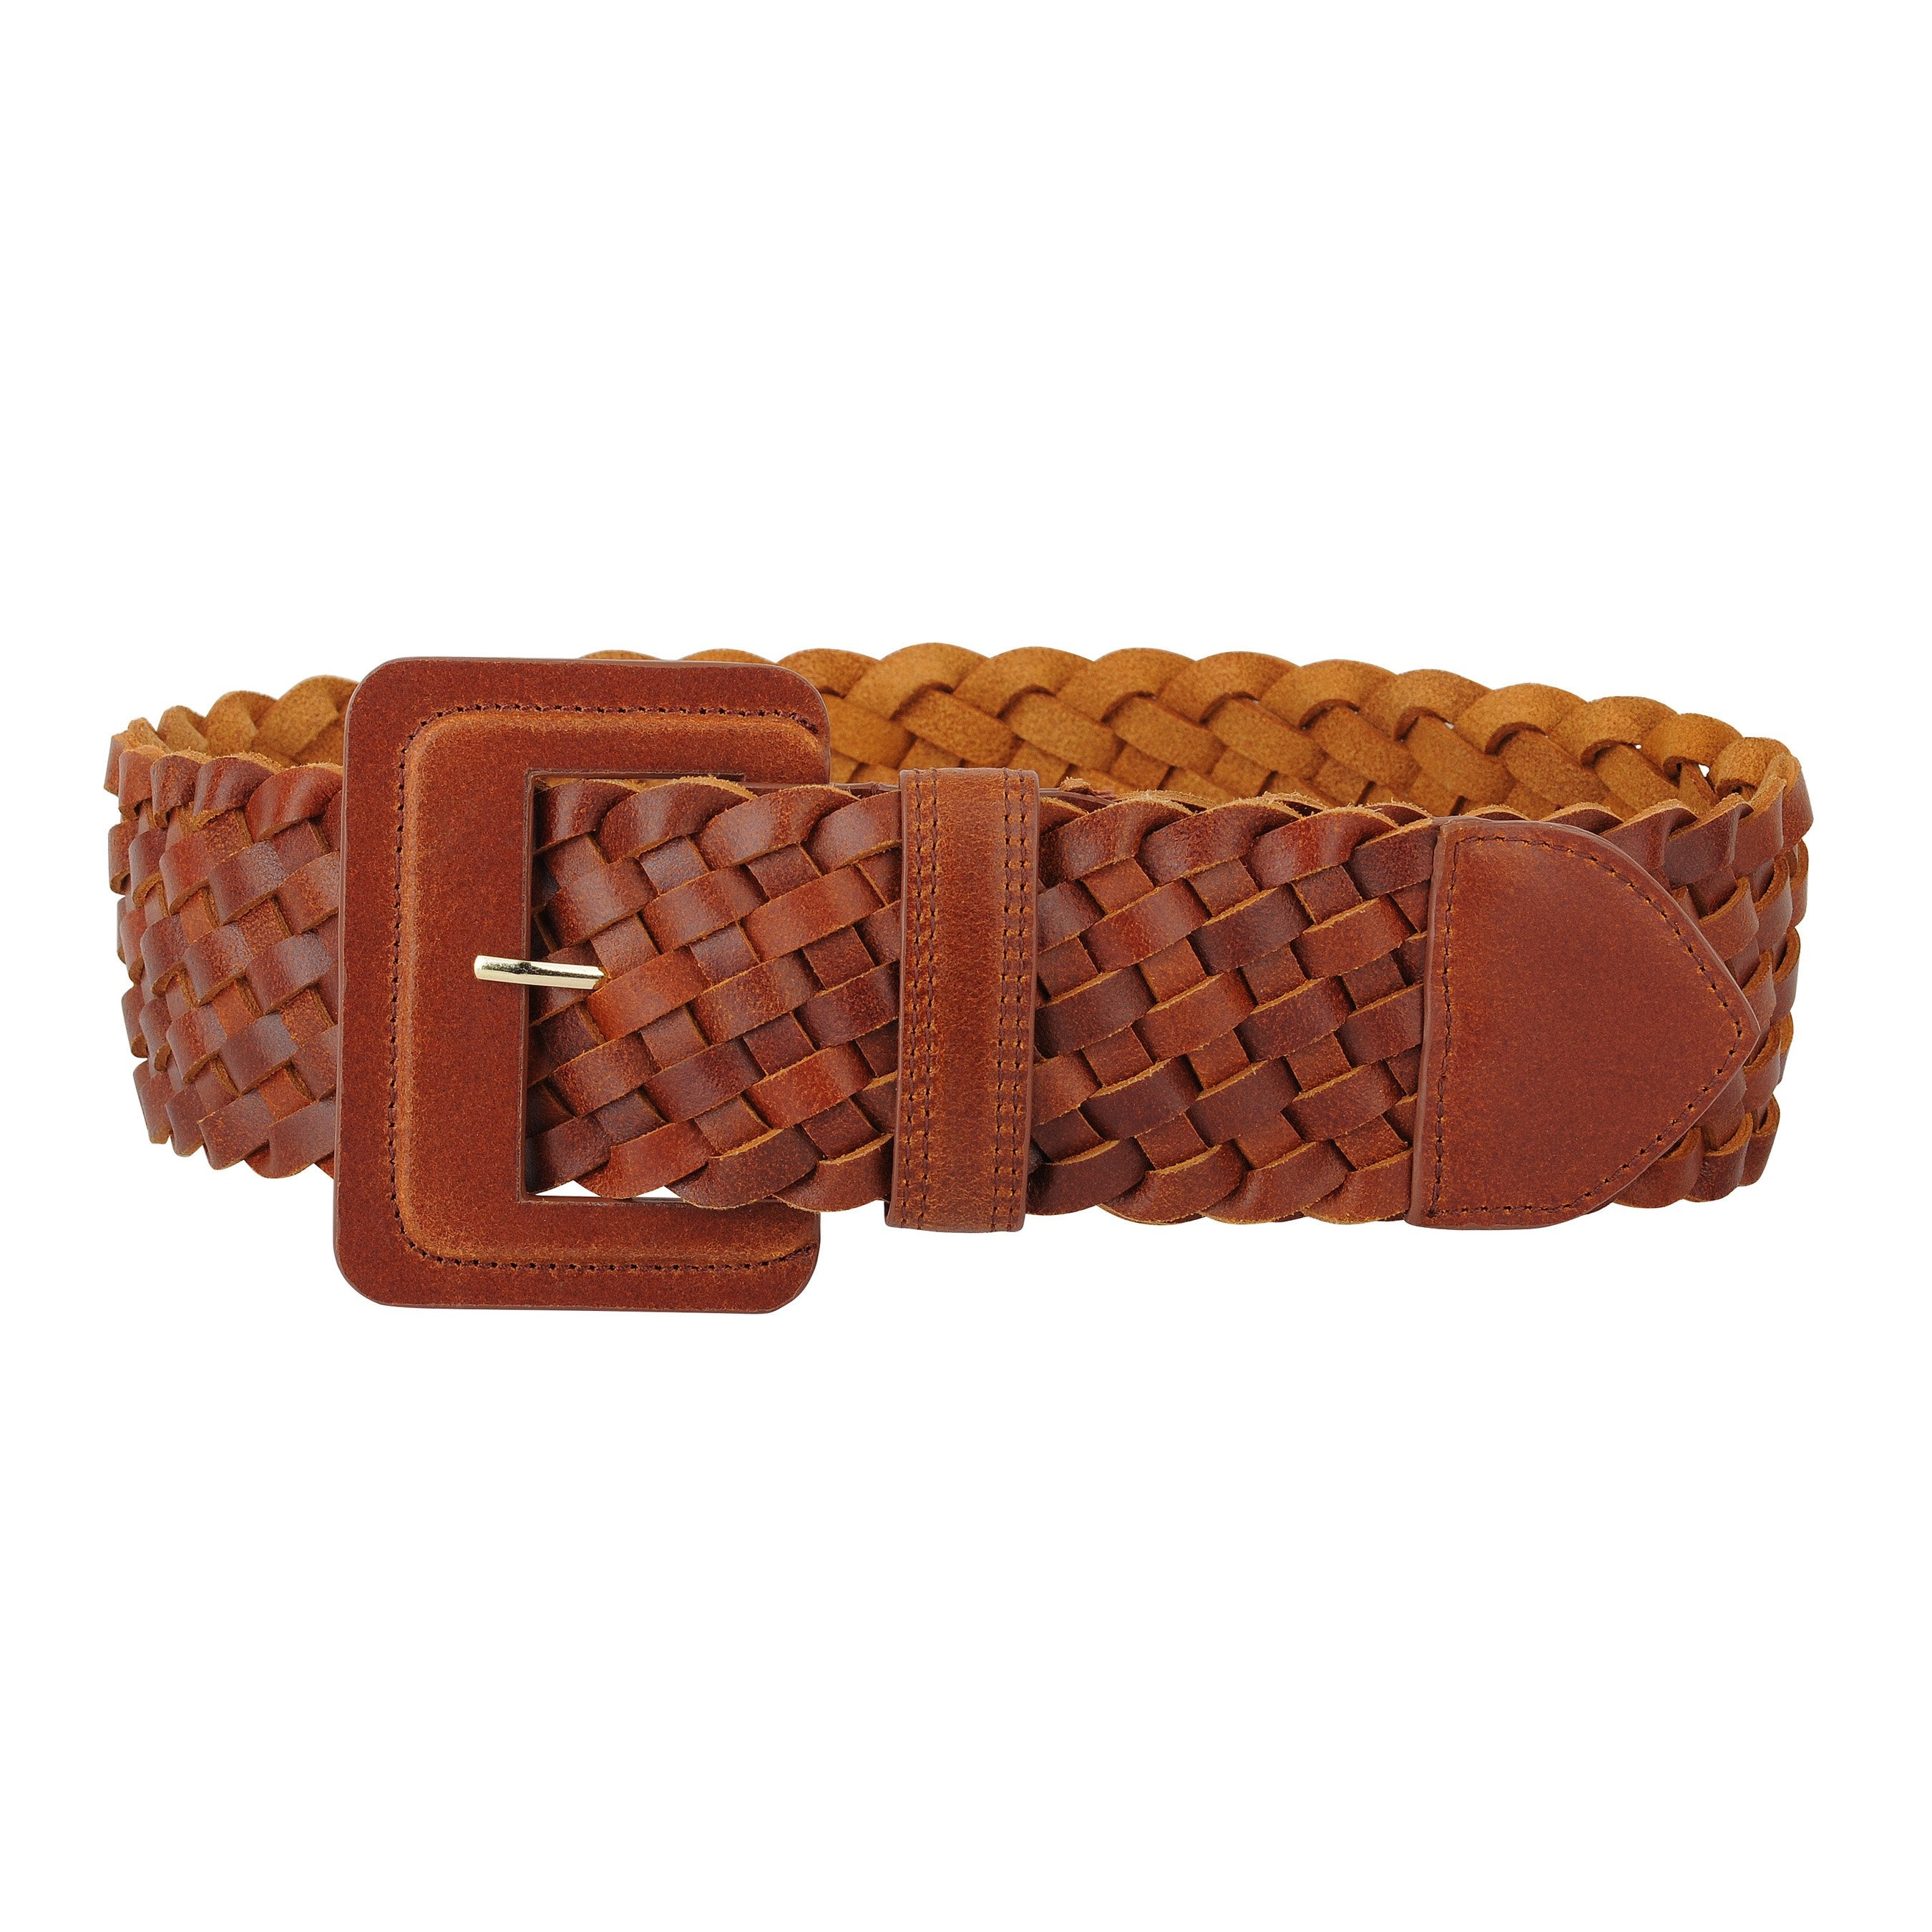 Wide Woven Braided Leather Belt